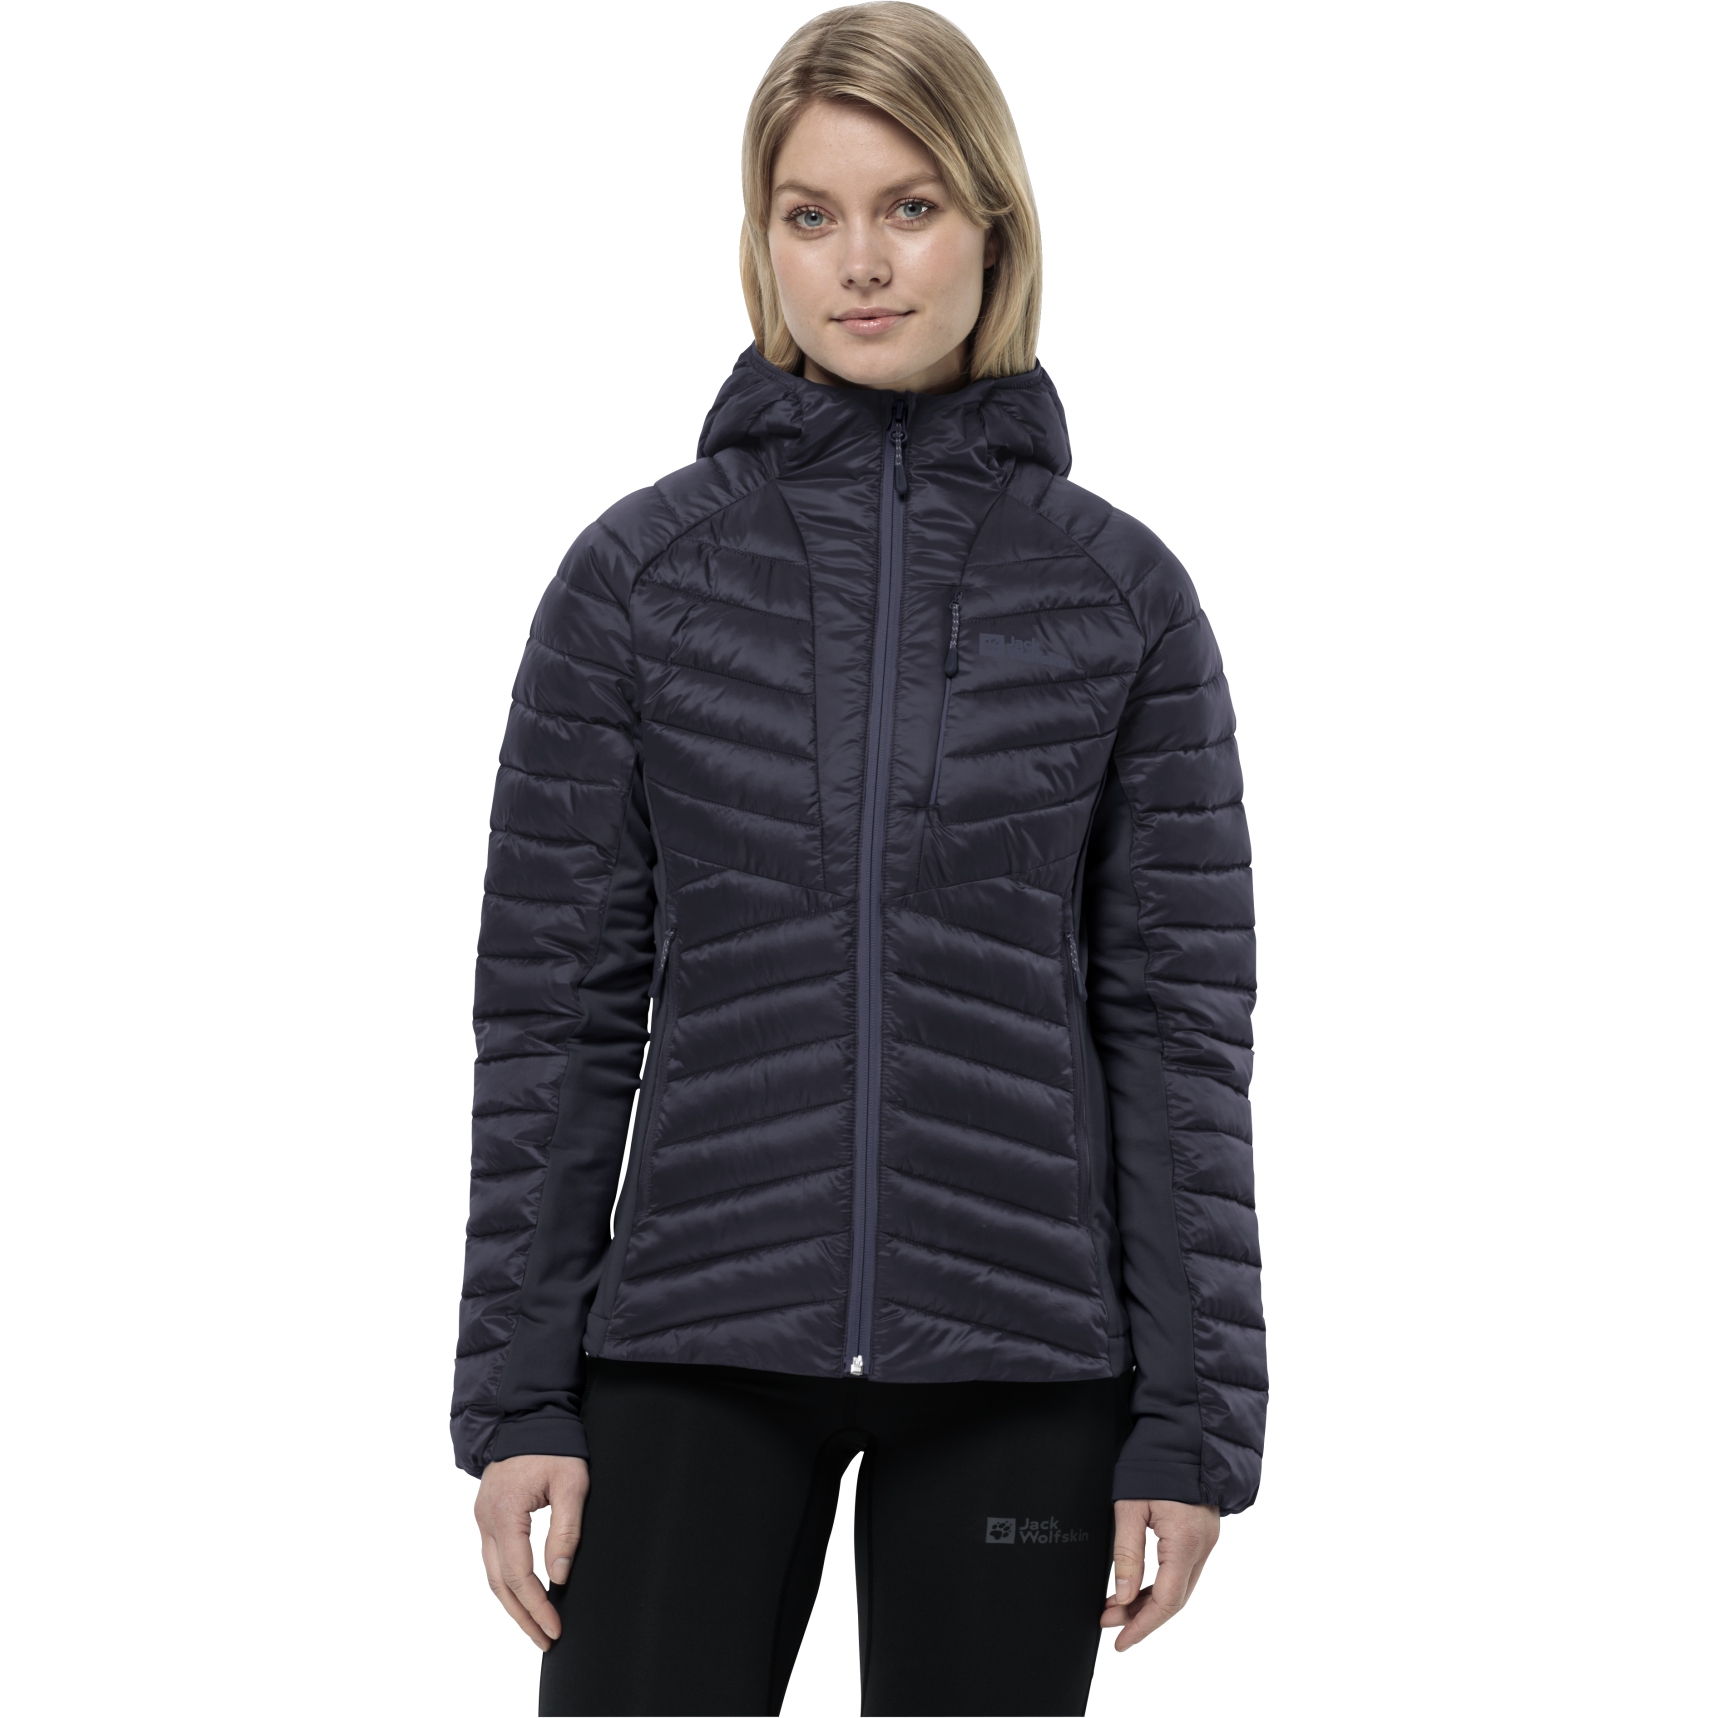 Picture of Jack Wolfskin Routeburn Pro Ins Womens Jacket - graphite